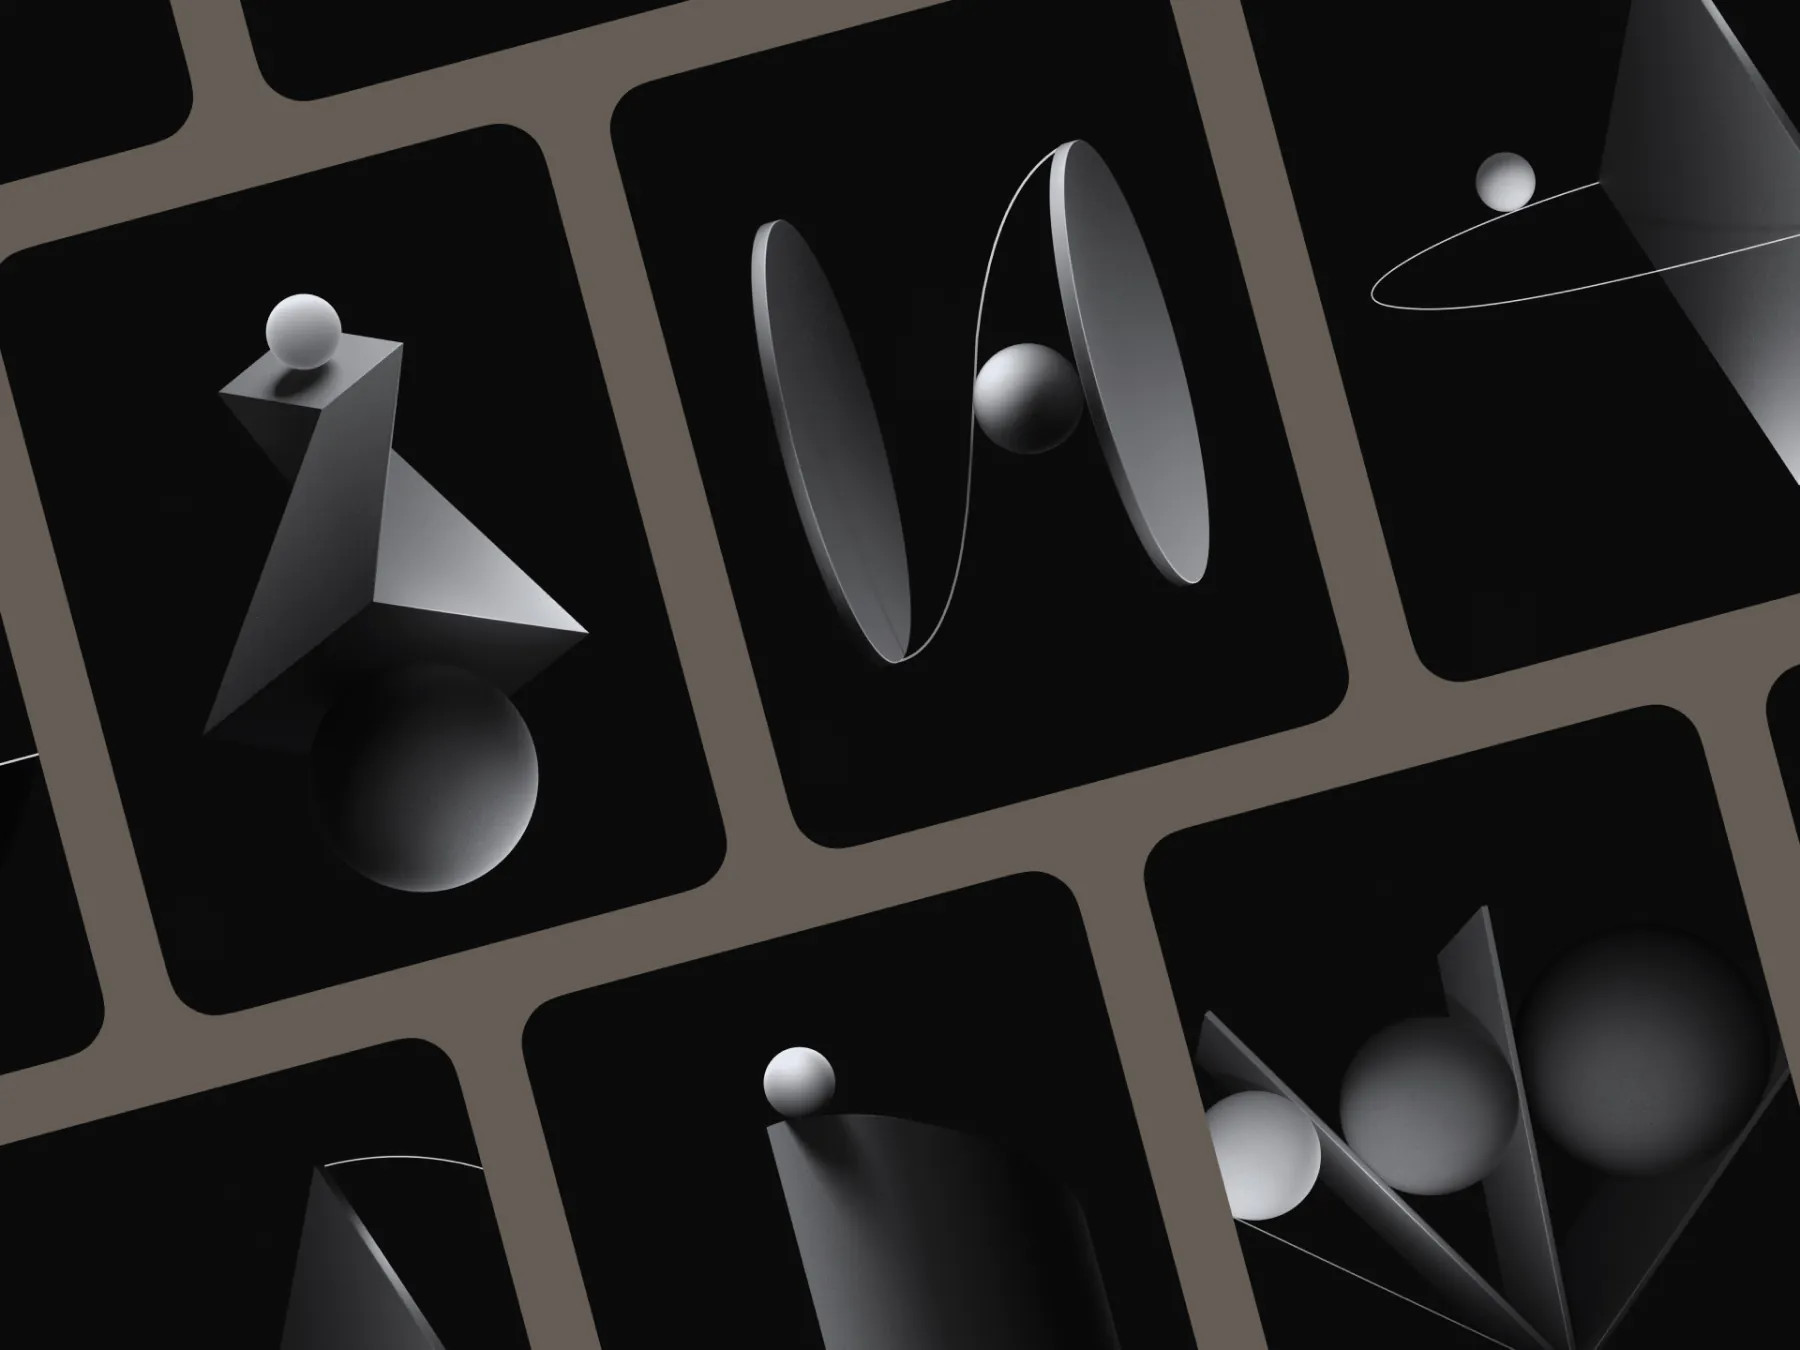 Abstract grid with monochrome geometric shapes representing key Genesis service concepts.